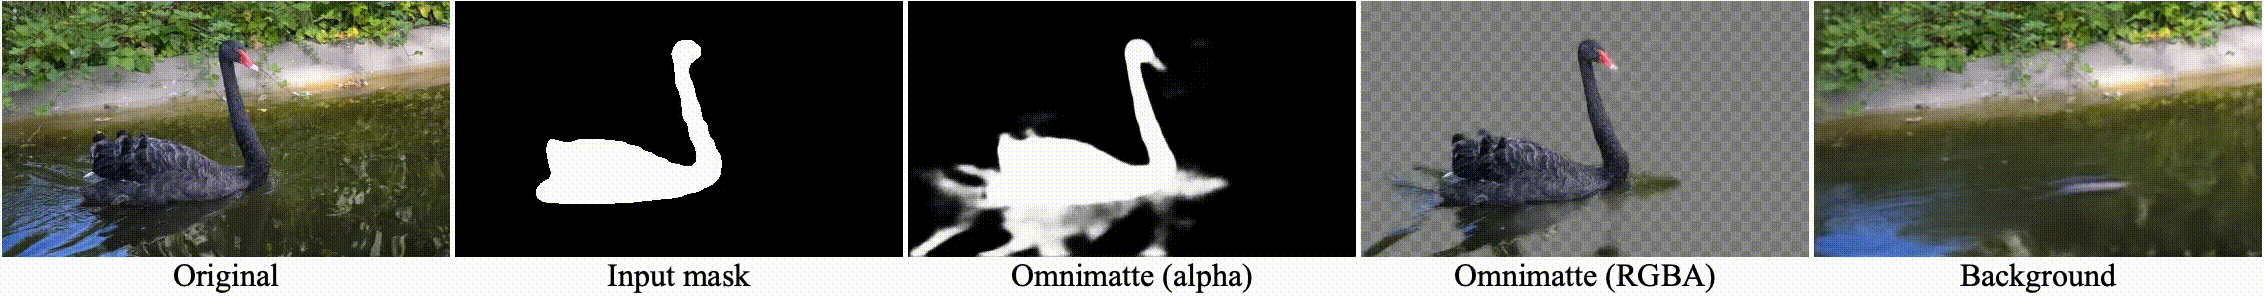 Omnimatte for removing objects and associated effects from videos